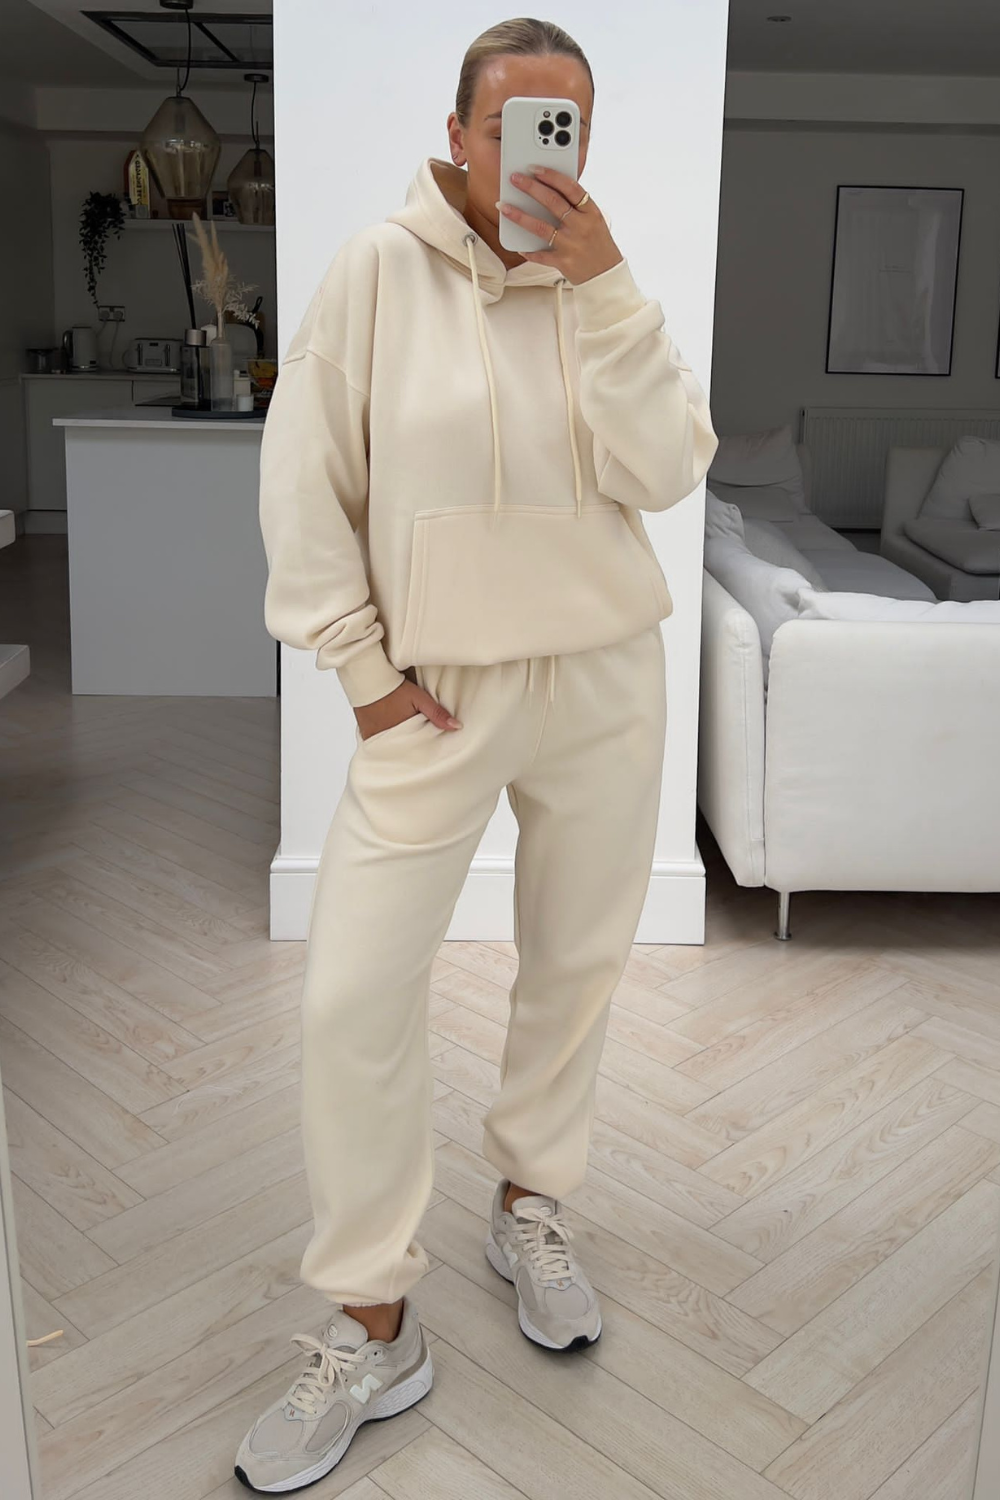 Loungewear jogger sets – Glamify Famous For Loungewear